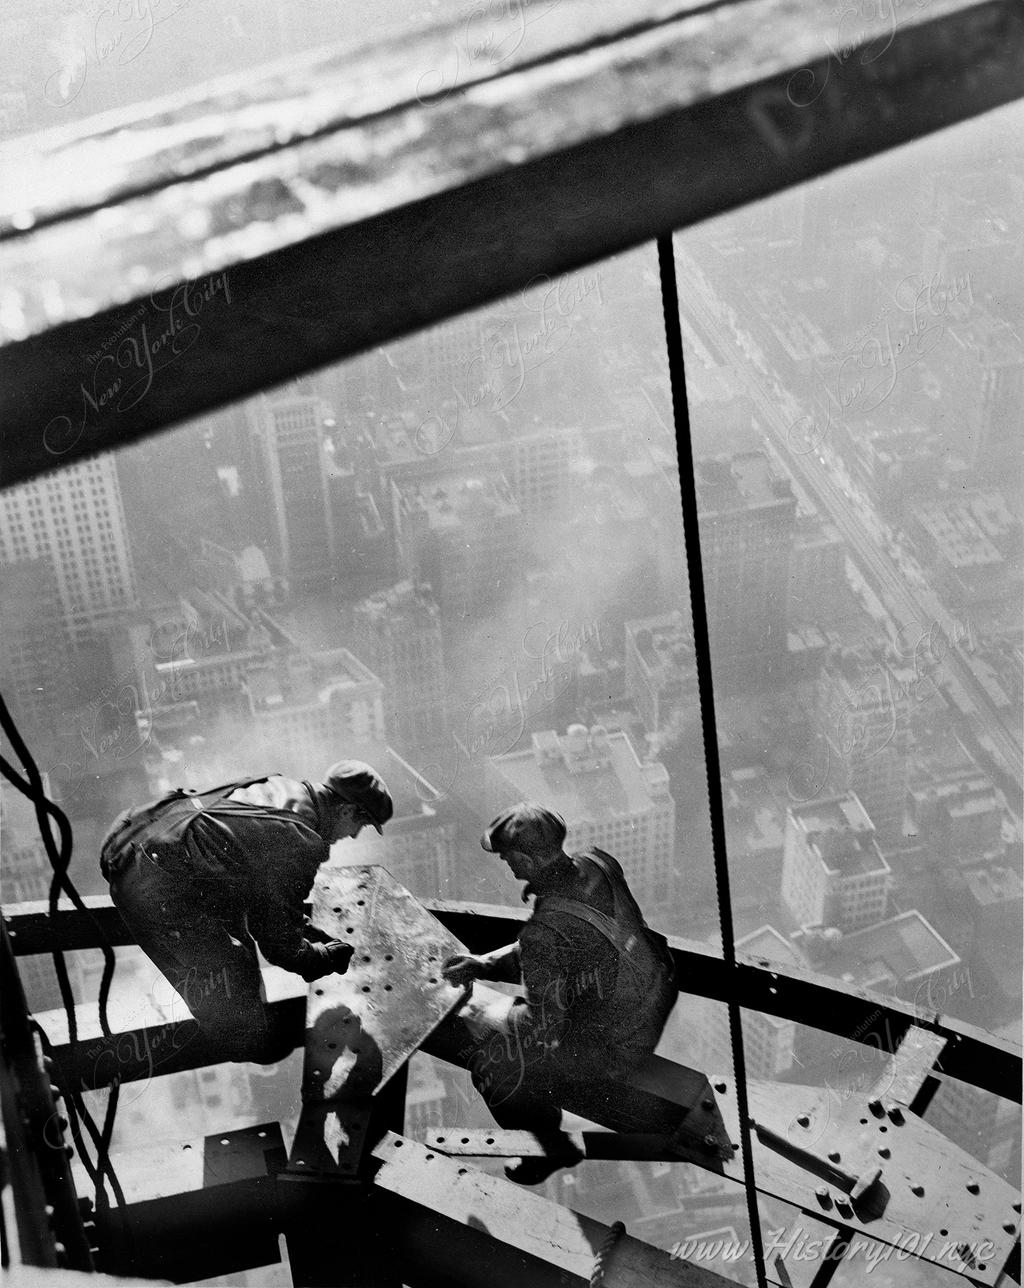 Photograph of two construction workers, perched atop the steel framework of the Empire State Building.